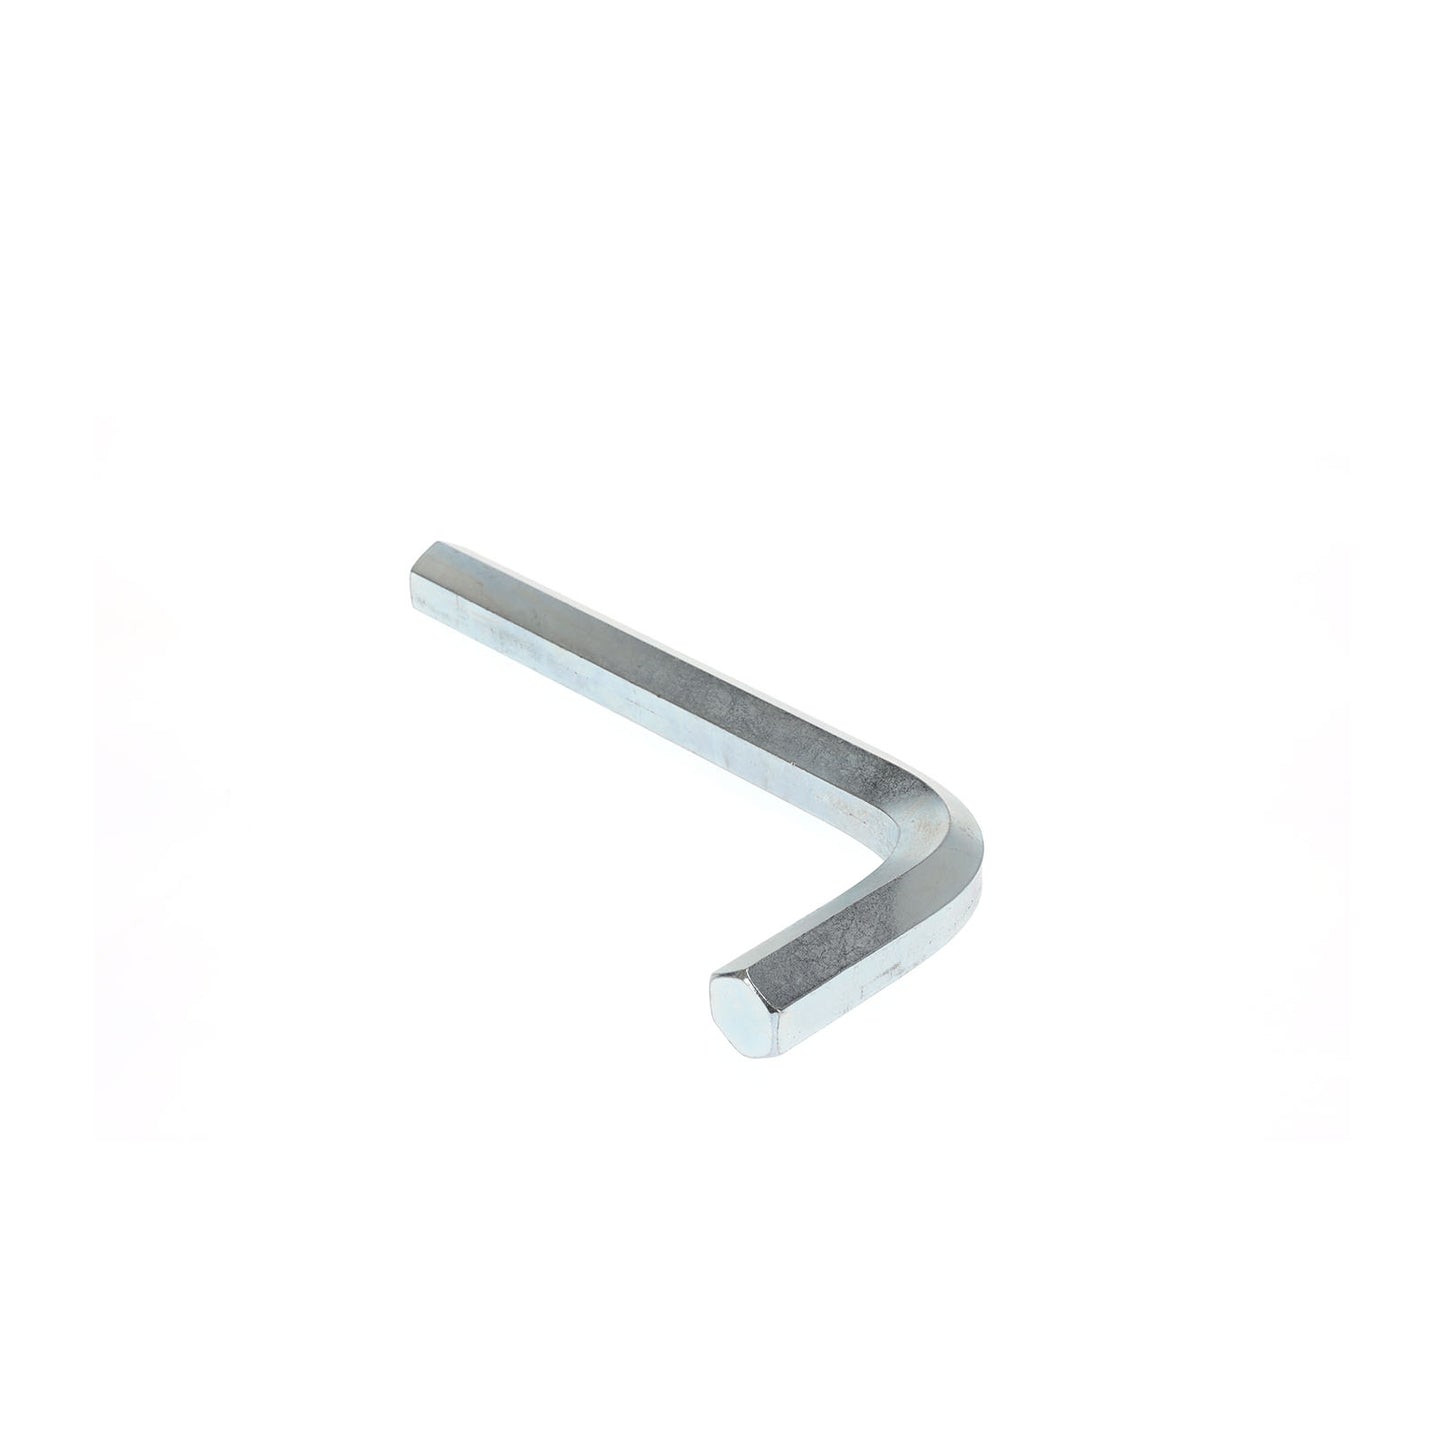 GEDORE 42 30 - Angled Allen Key 30 mm (6342630)